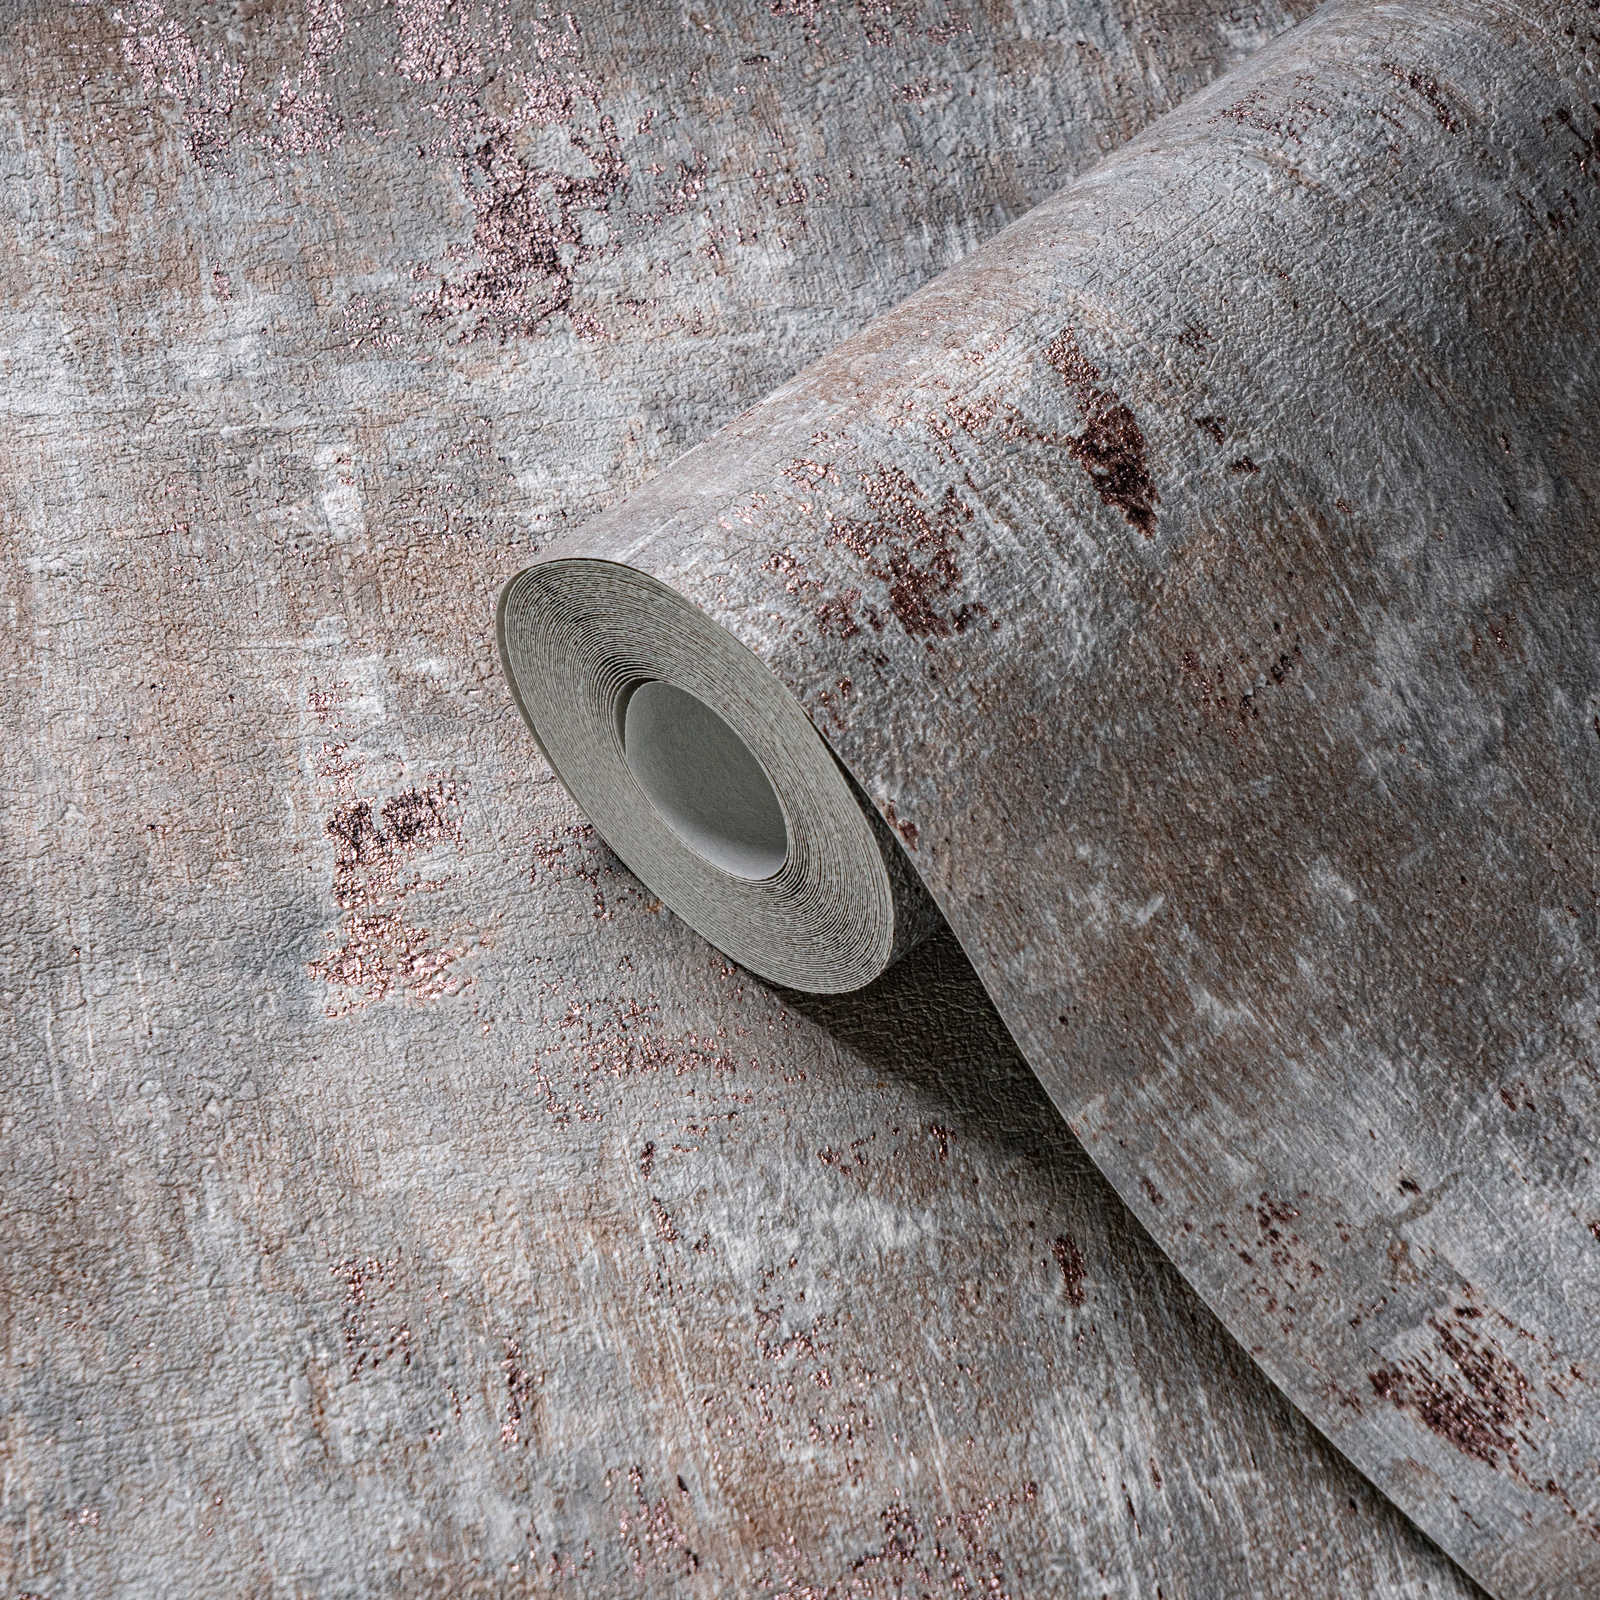             Non-woven wallpaper in used look with metallic accents - grey, blue, bronze
        